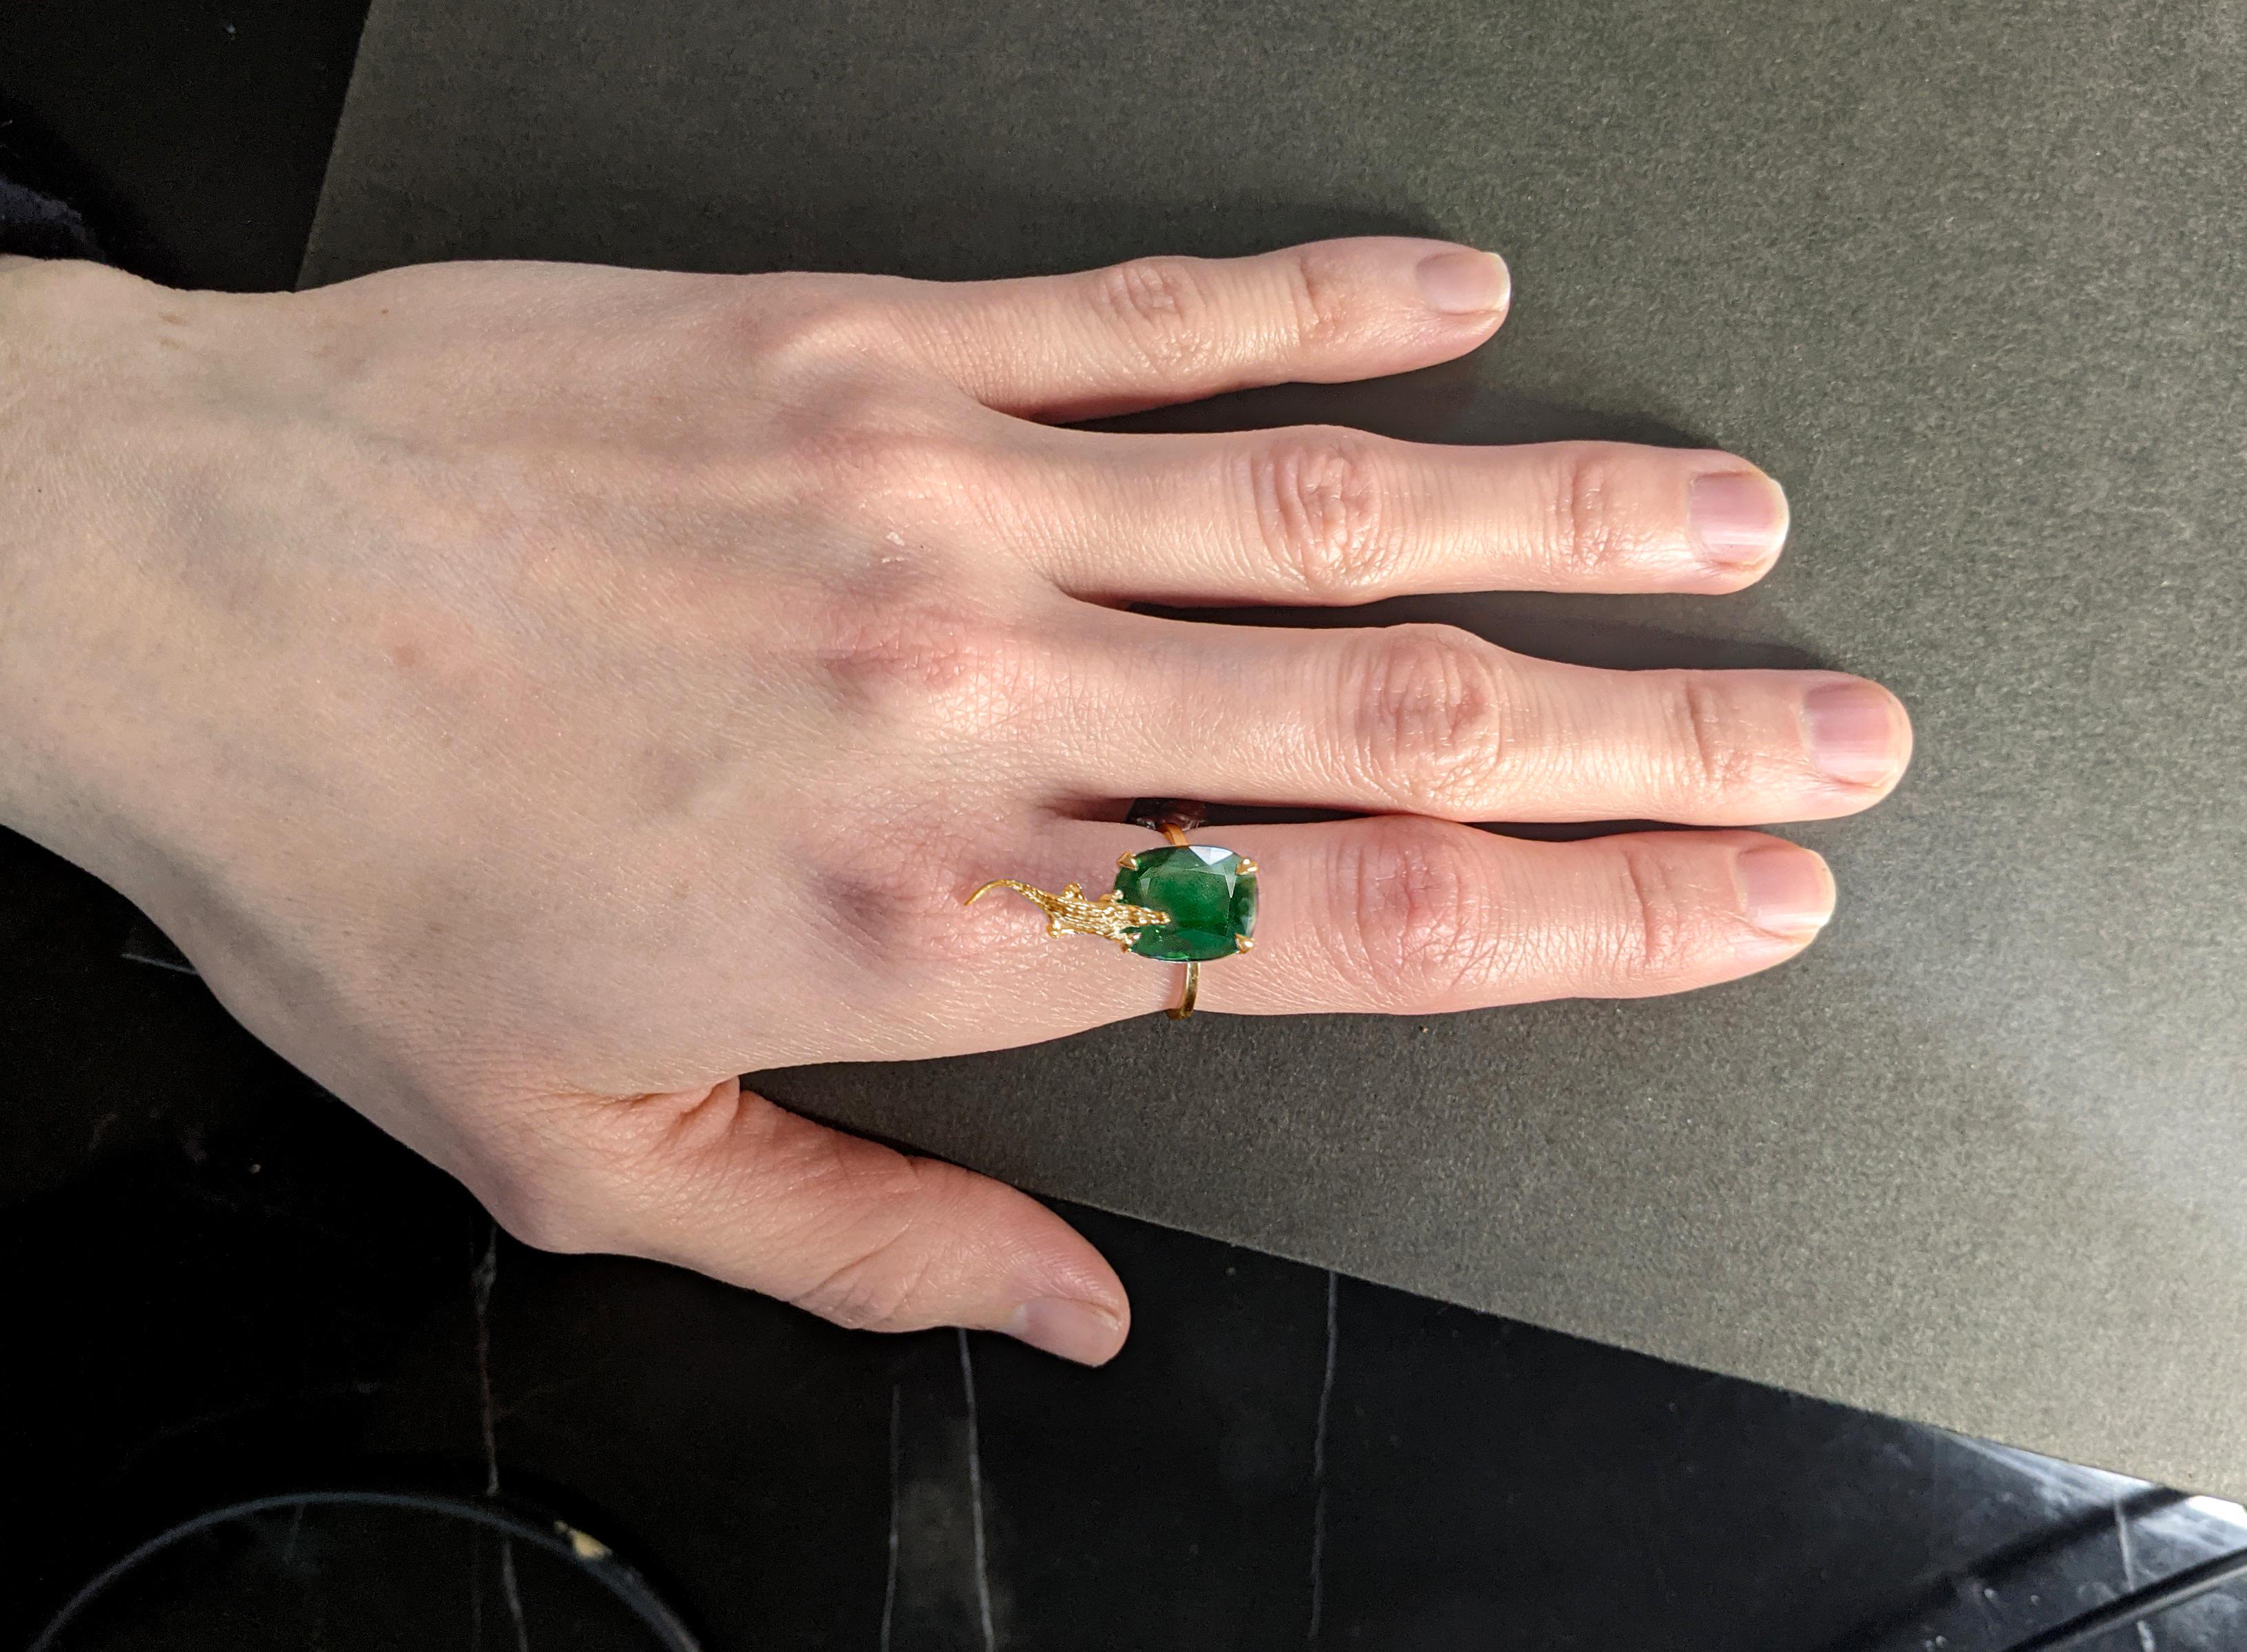 This 18 karat yellow gold contemporary Mesopotamian designer ring is encrusted with a stunning 2.23 carat natural cushion emerald, measuring 11x8.7 mm. The gem's neon green color is truly captivating and enhances the ring's modern design.

You can